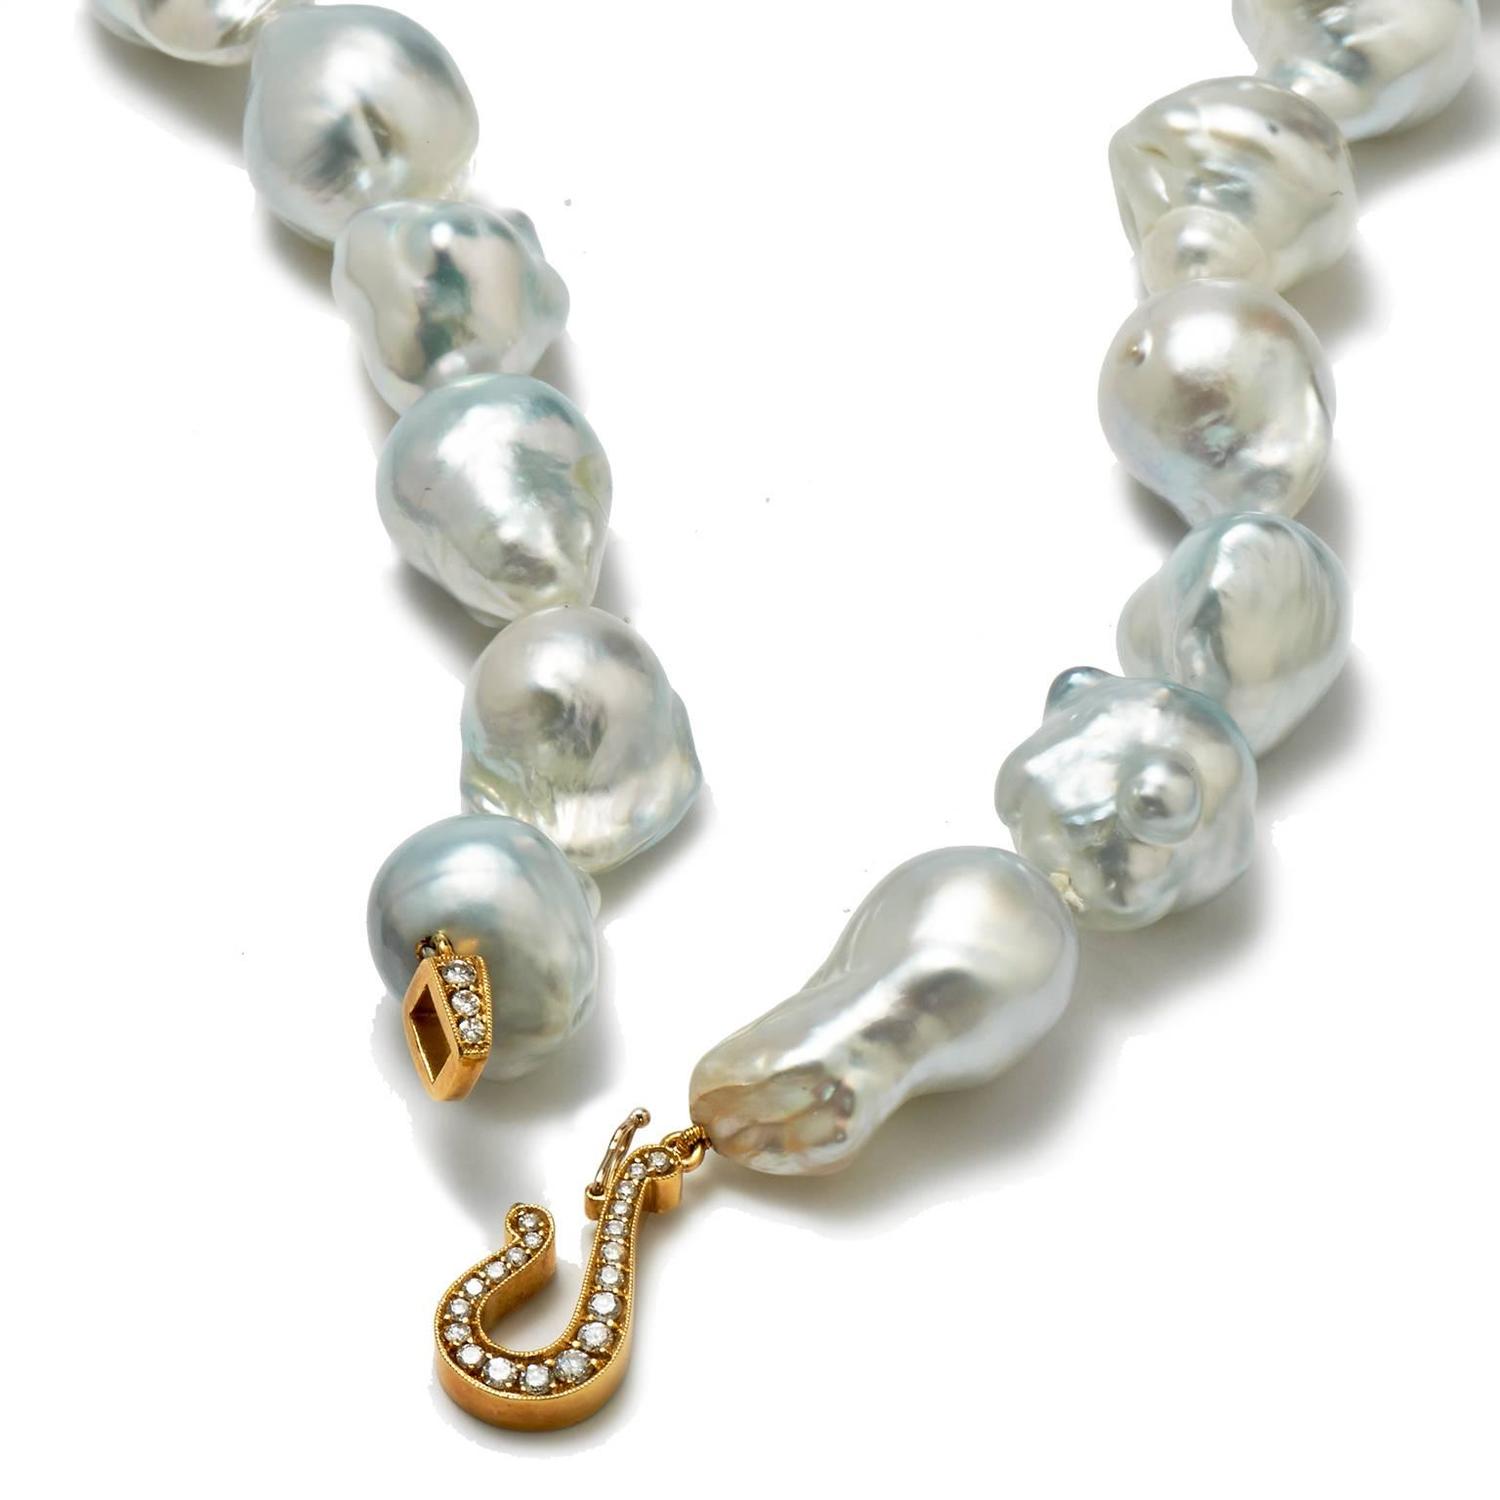 Australian Baroque Pearl Necklace with Diamond Clasp For Sale at 1stdibs